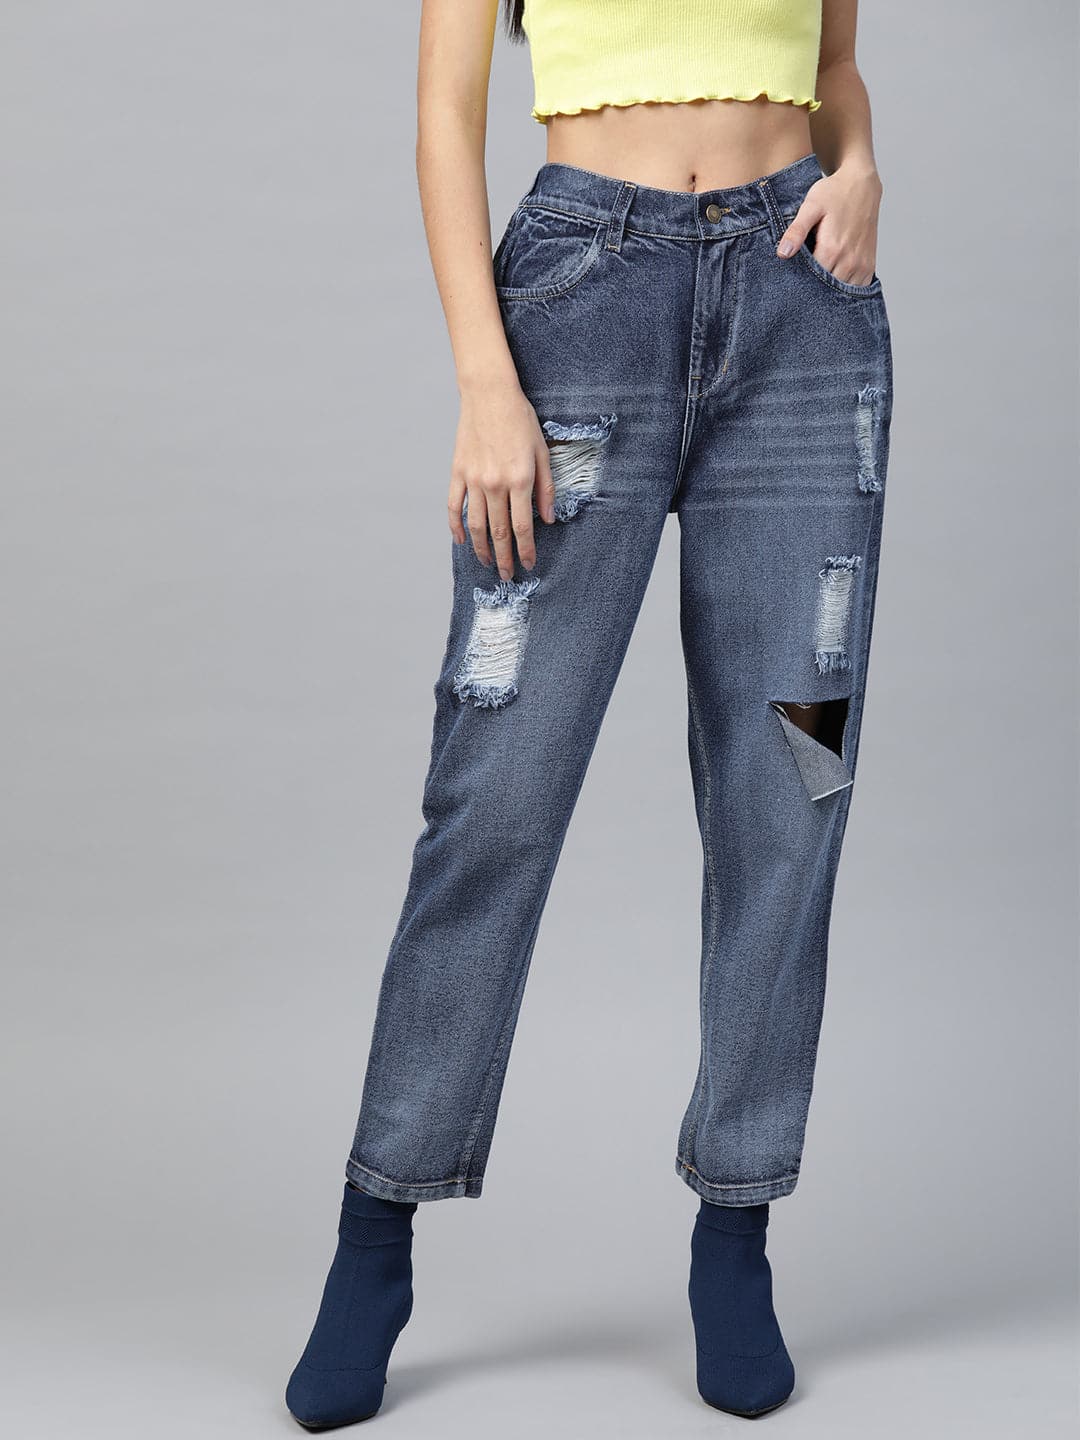 Buy Ripped Jeans For Girls Online In India At Best Prices